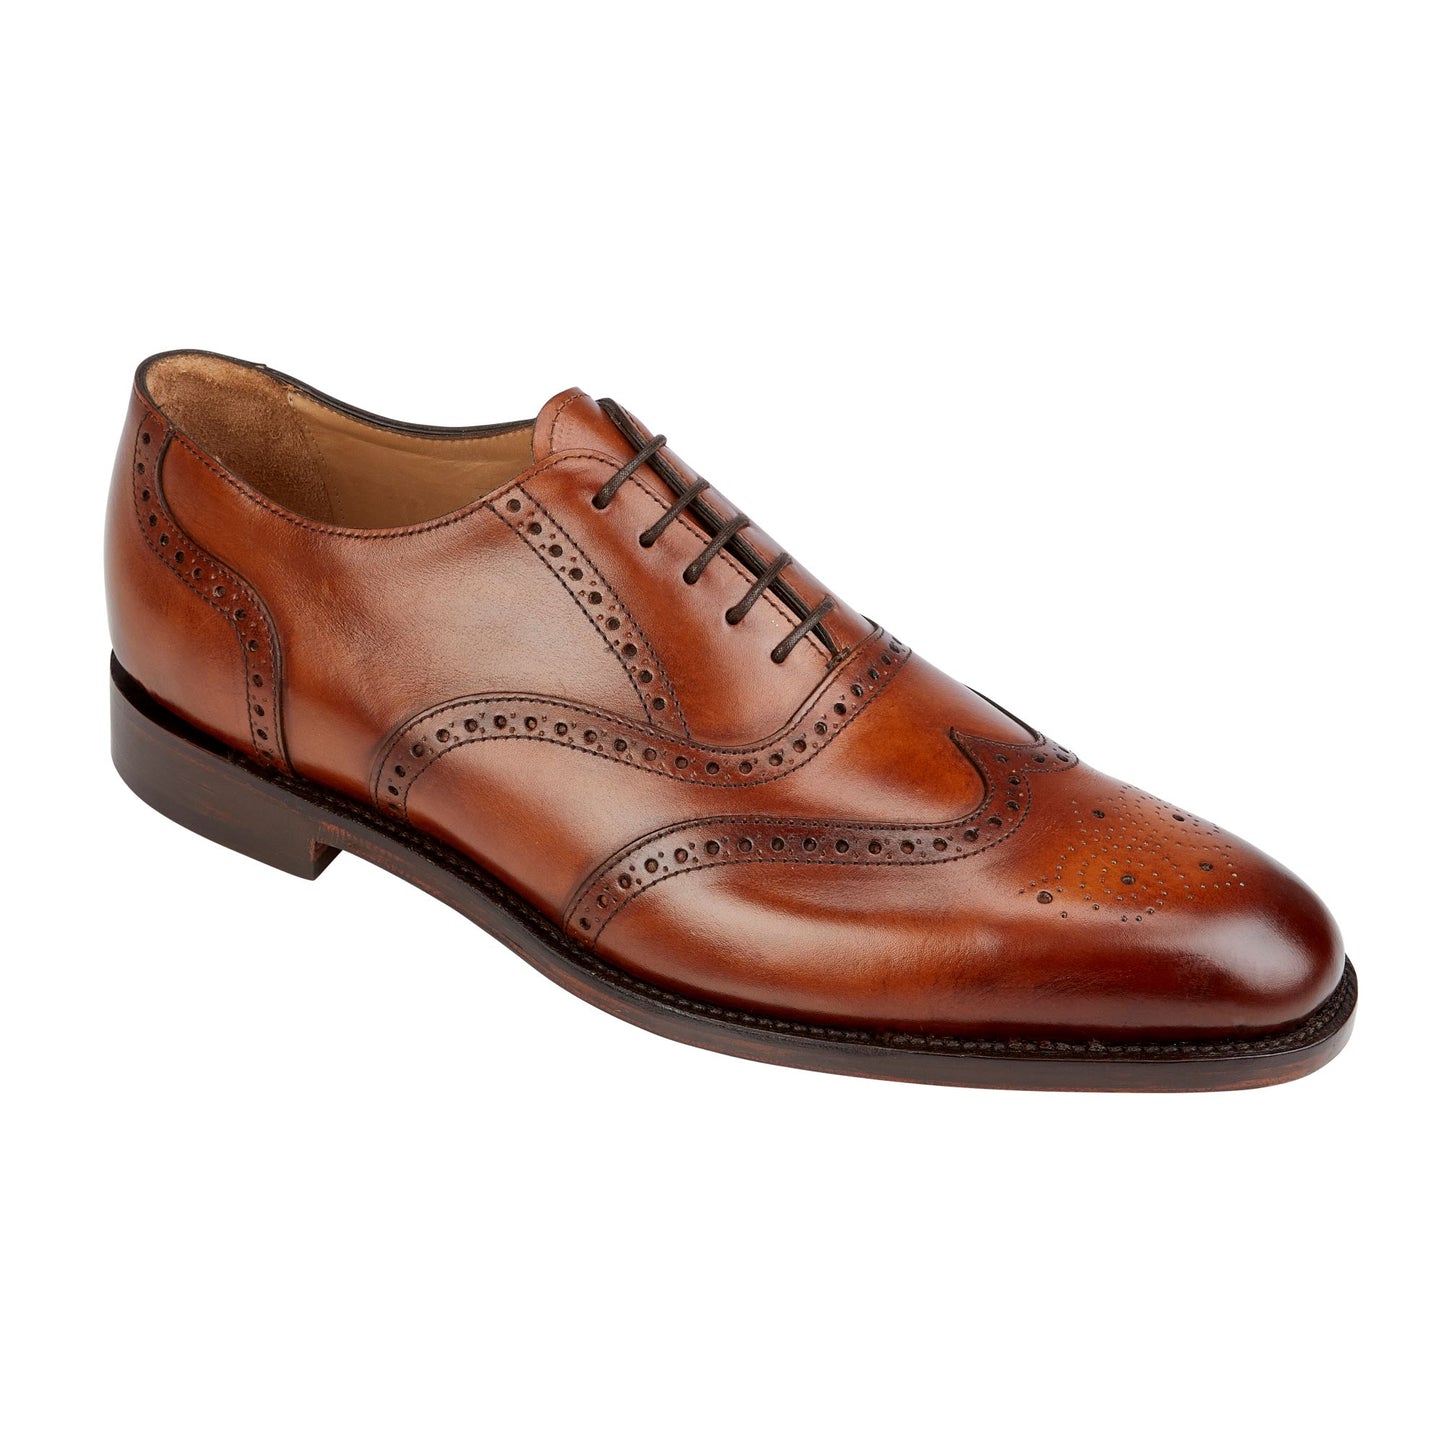 Henry | Oxford Wing Tip Brogue